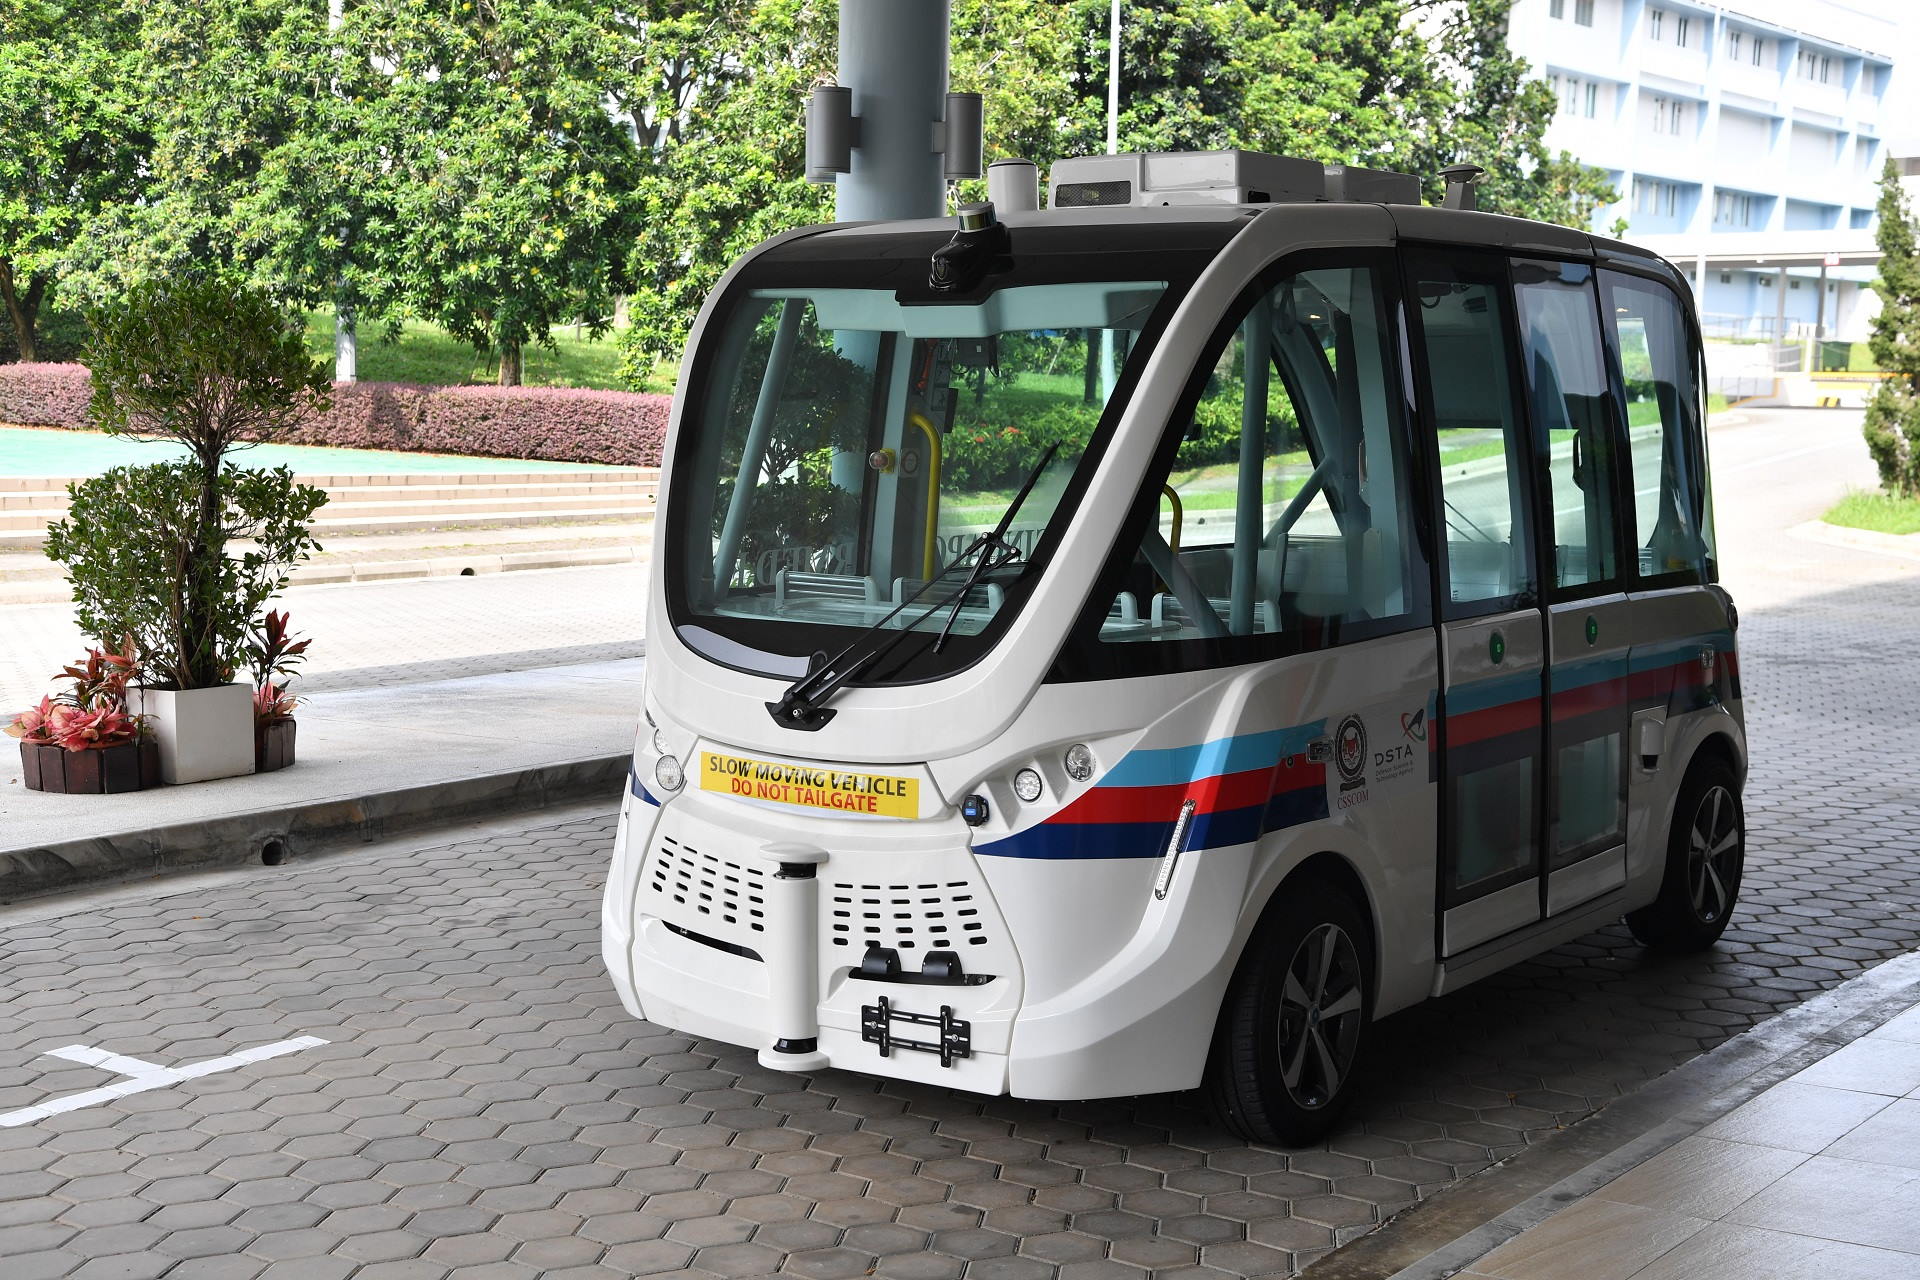 SAF trialling autonomous vehicles for logistics and personnel transport in camps